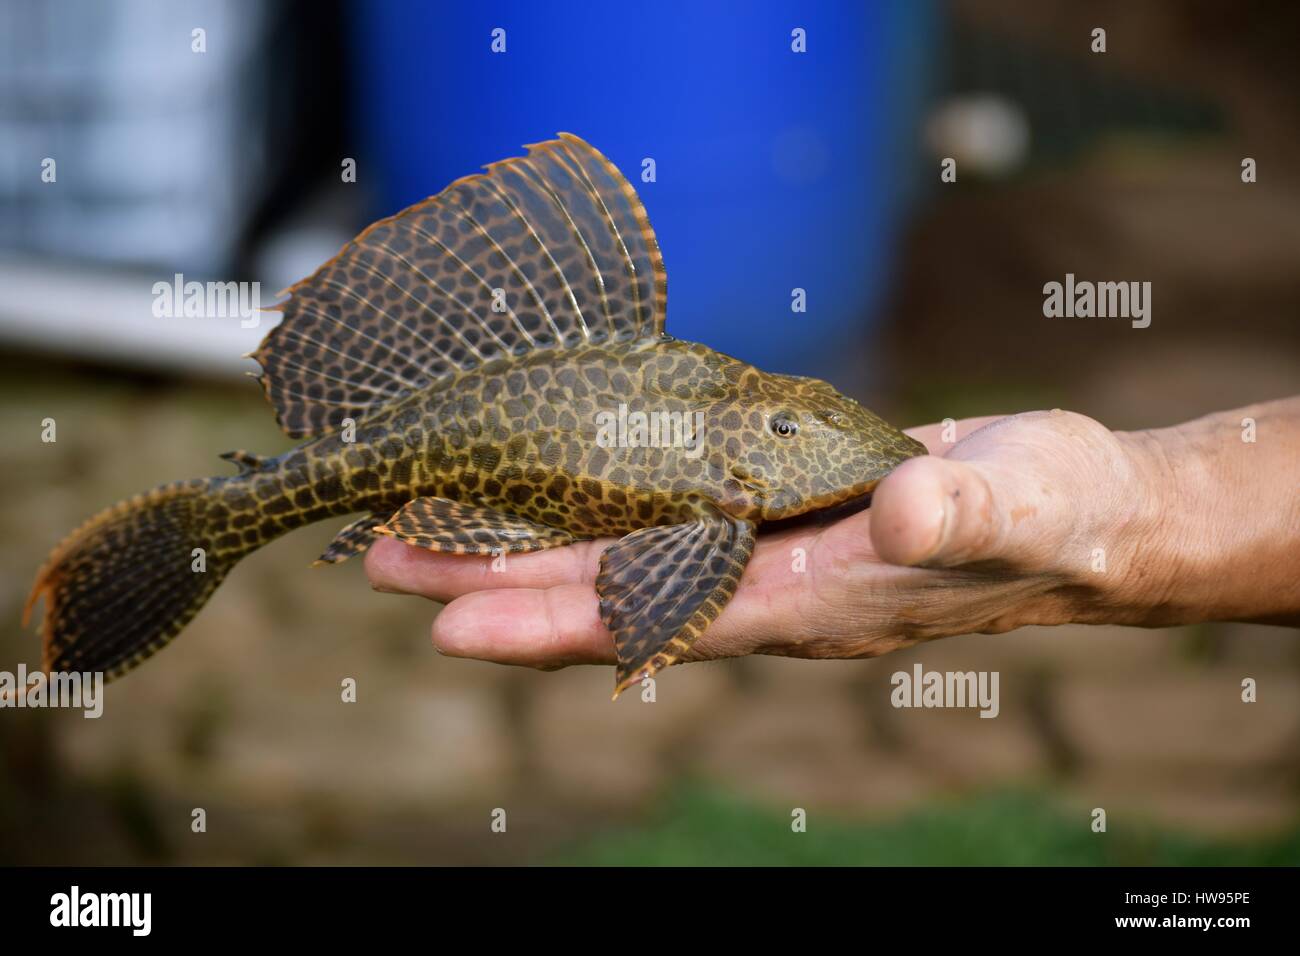 Plescostomus tropical fish, also known as pleco, is part of the armored catfish family. It is commonly  used in aquariums to help control algae. Stock Photo